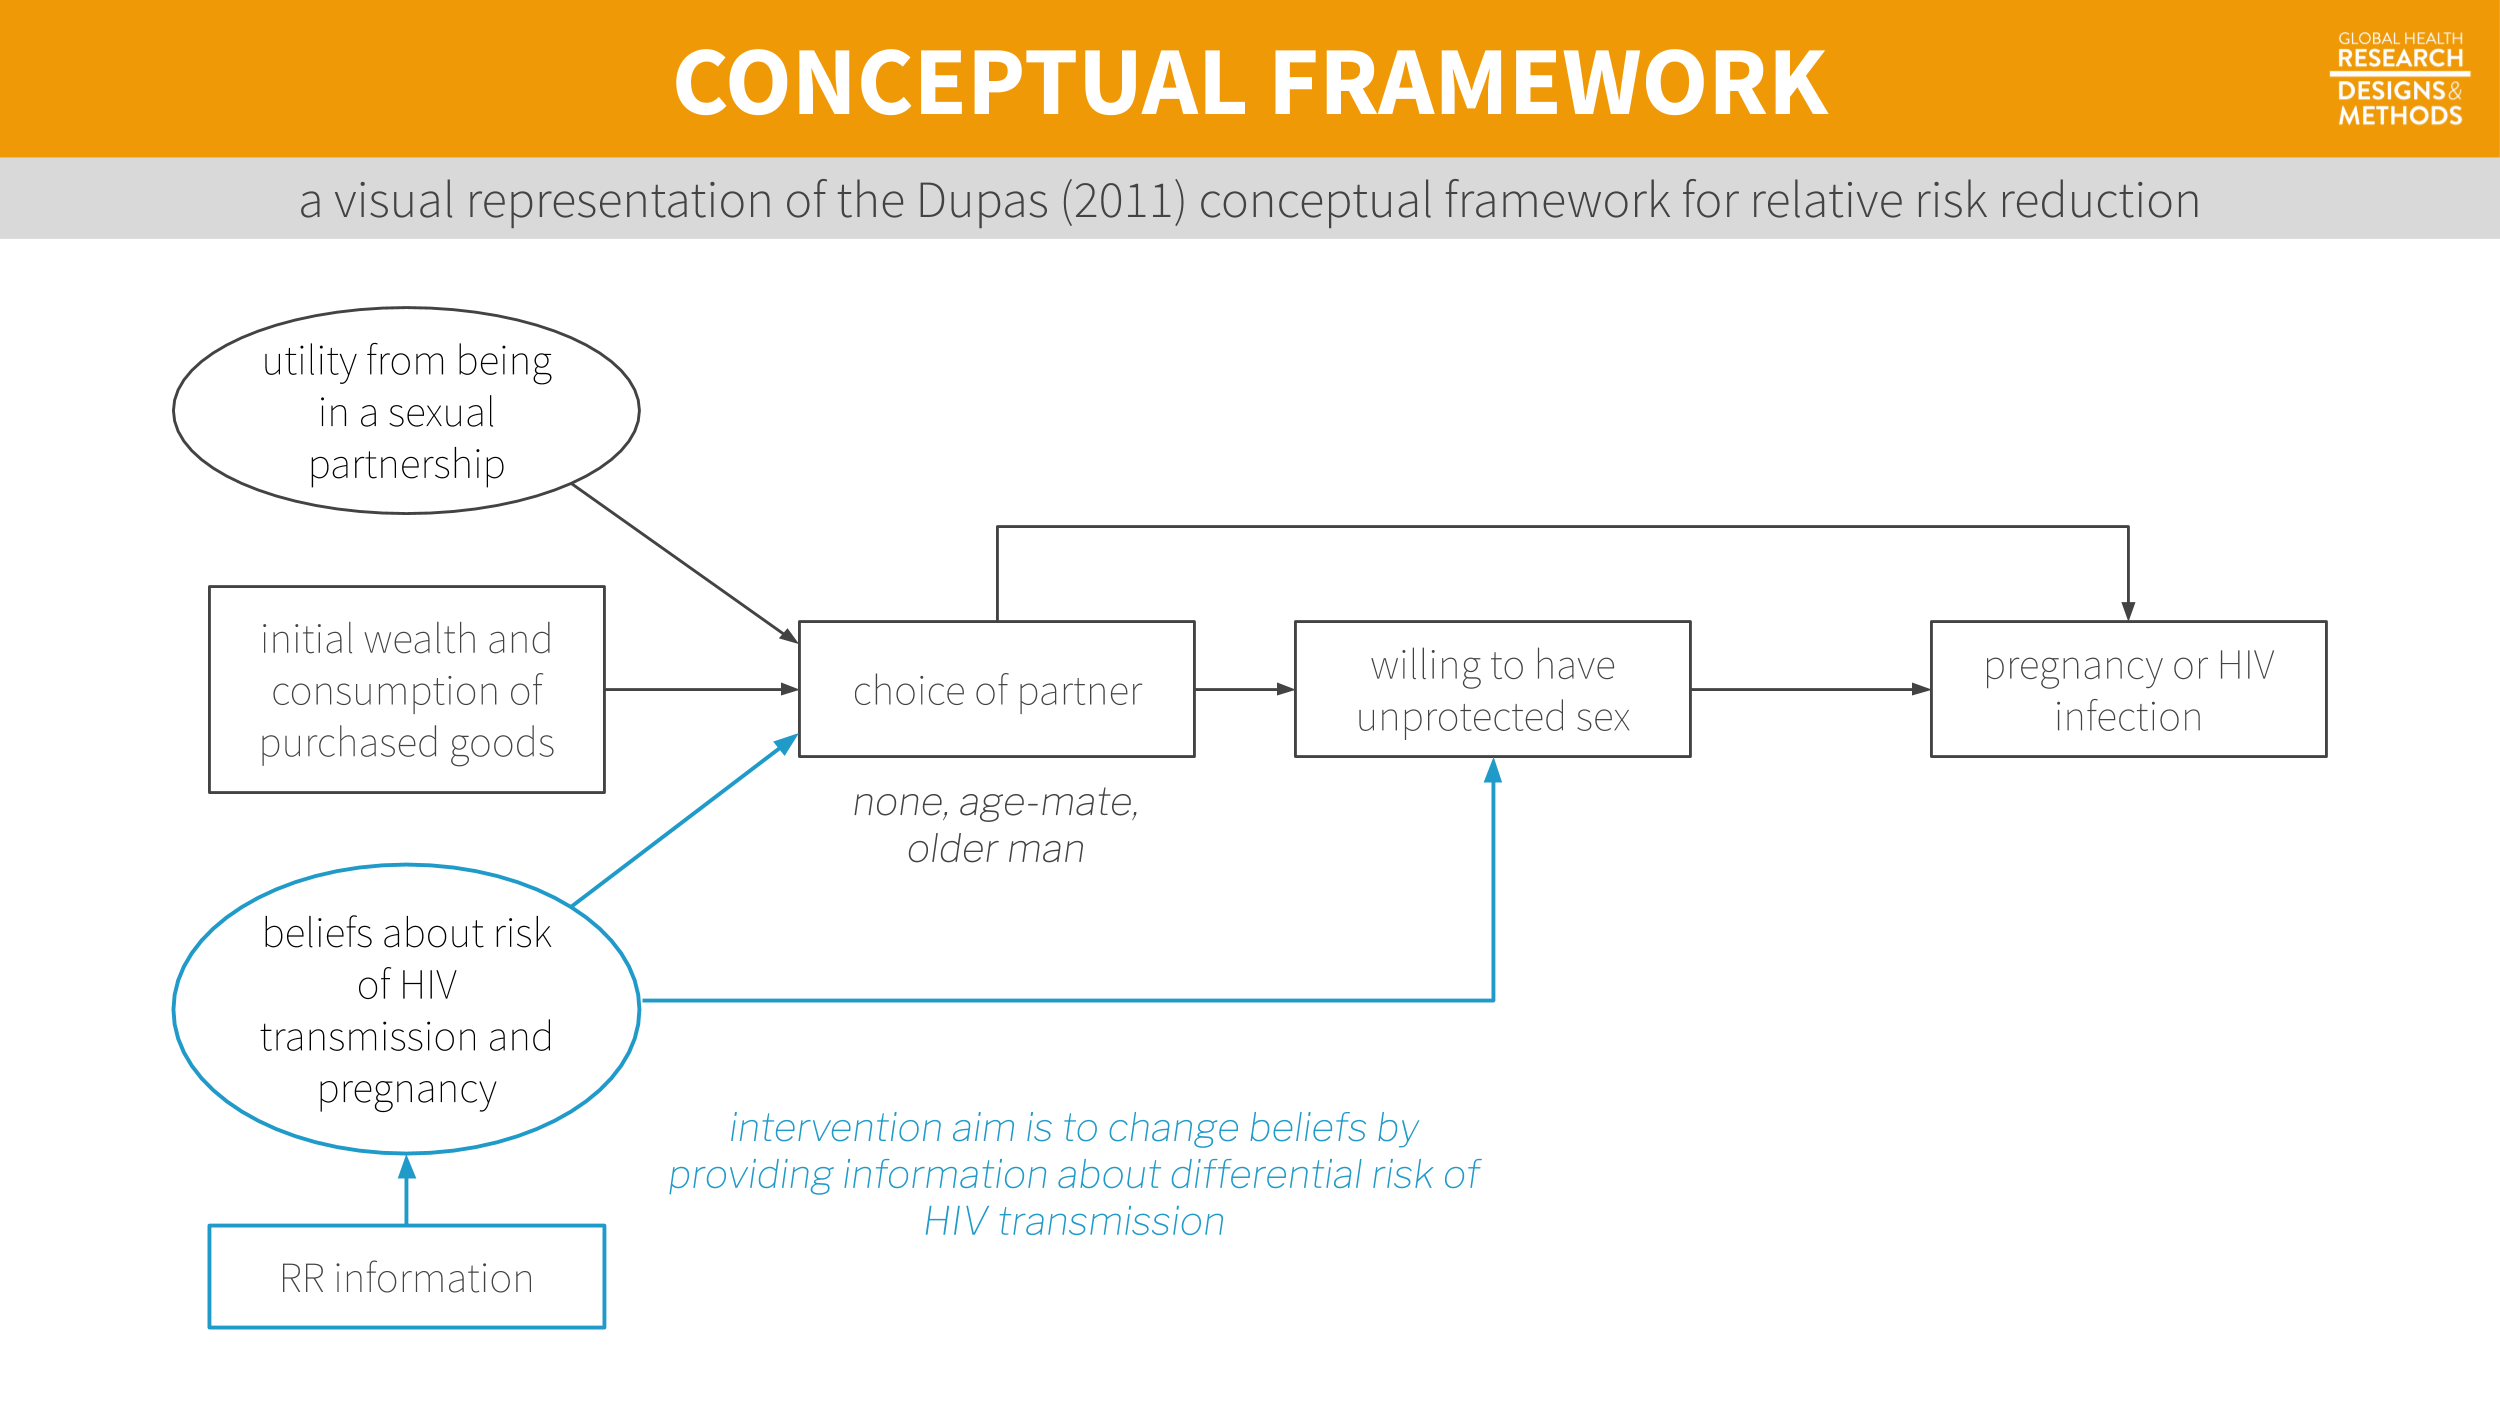 A visual representation of the Dupas (2011) conceptual framework from Chapter 6.